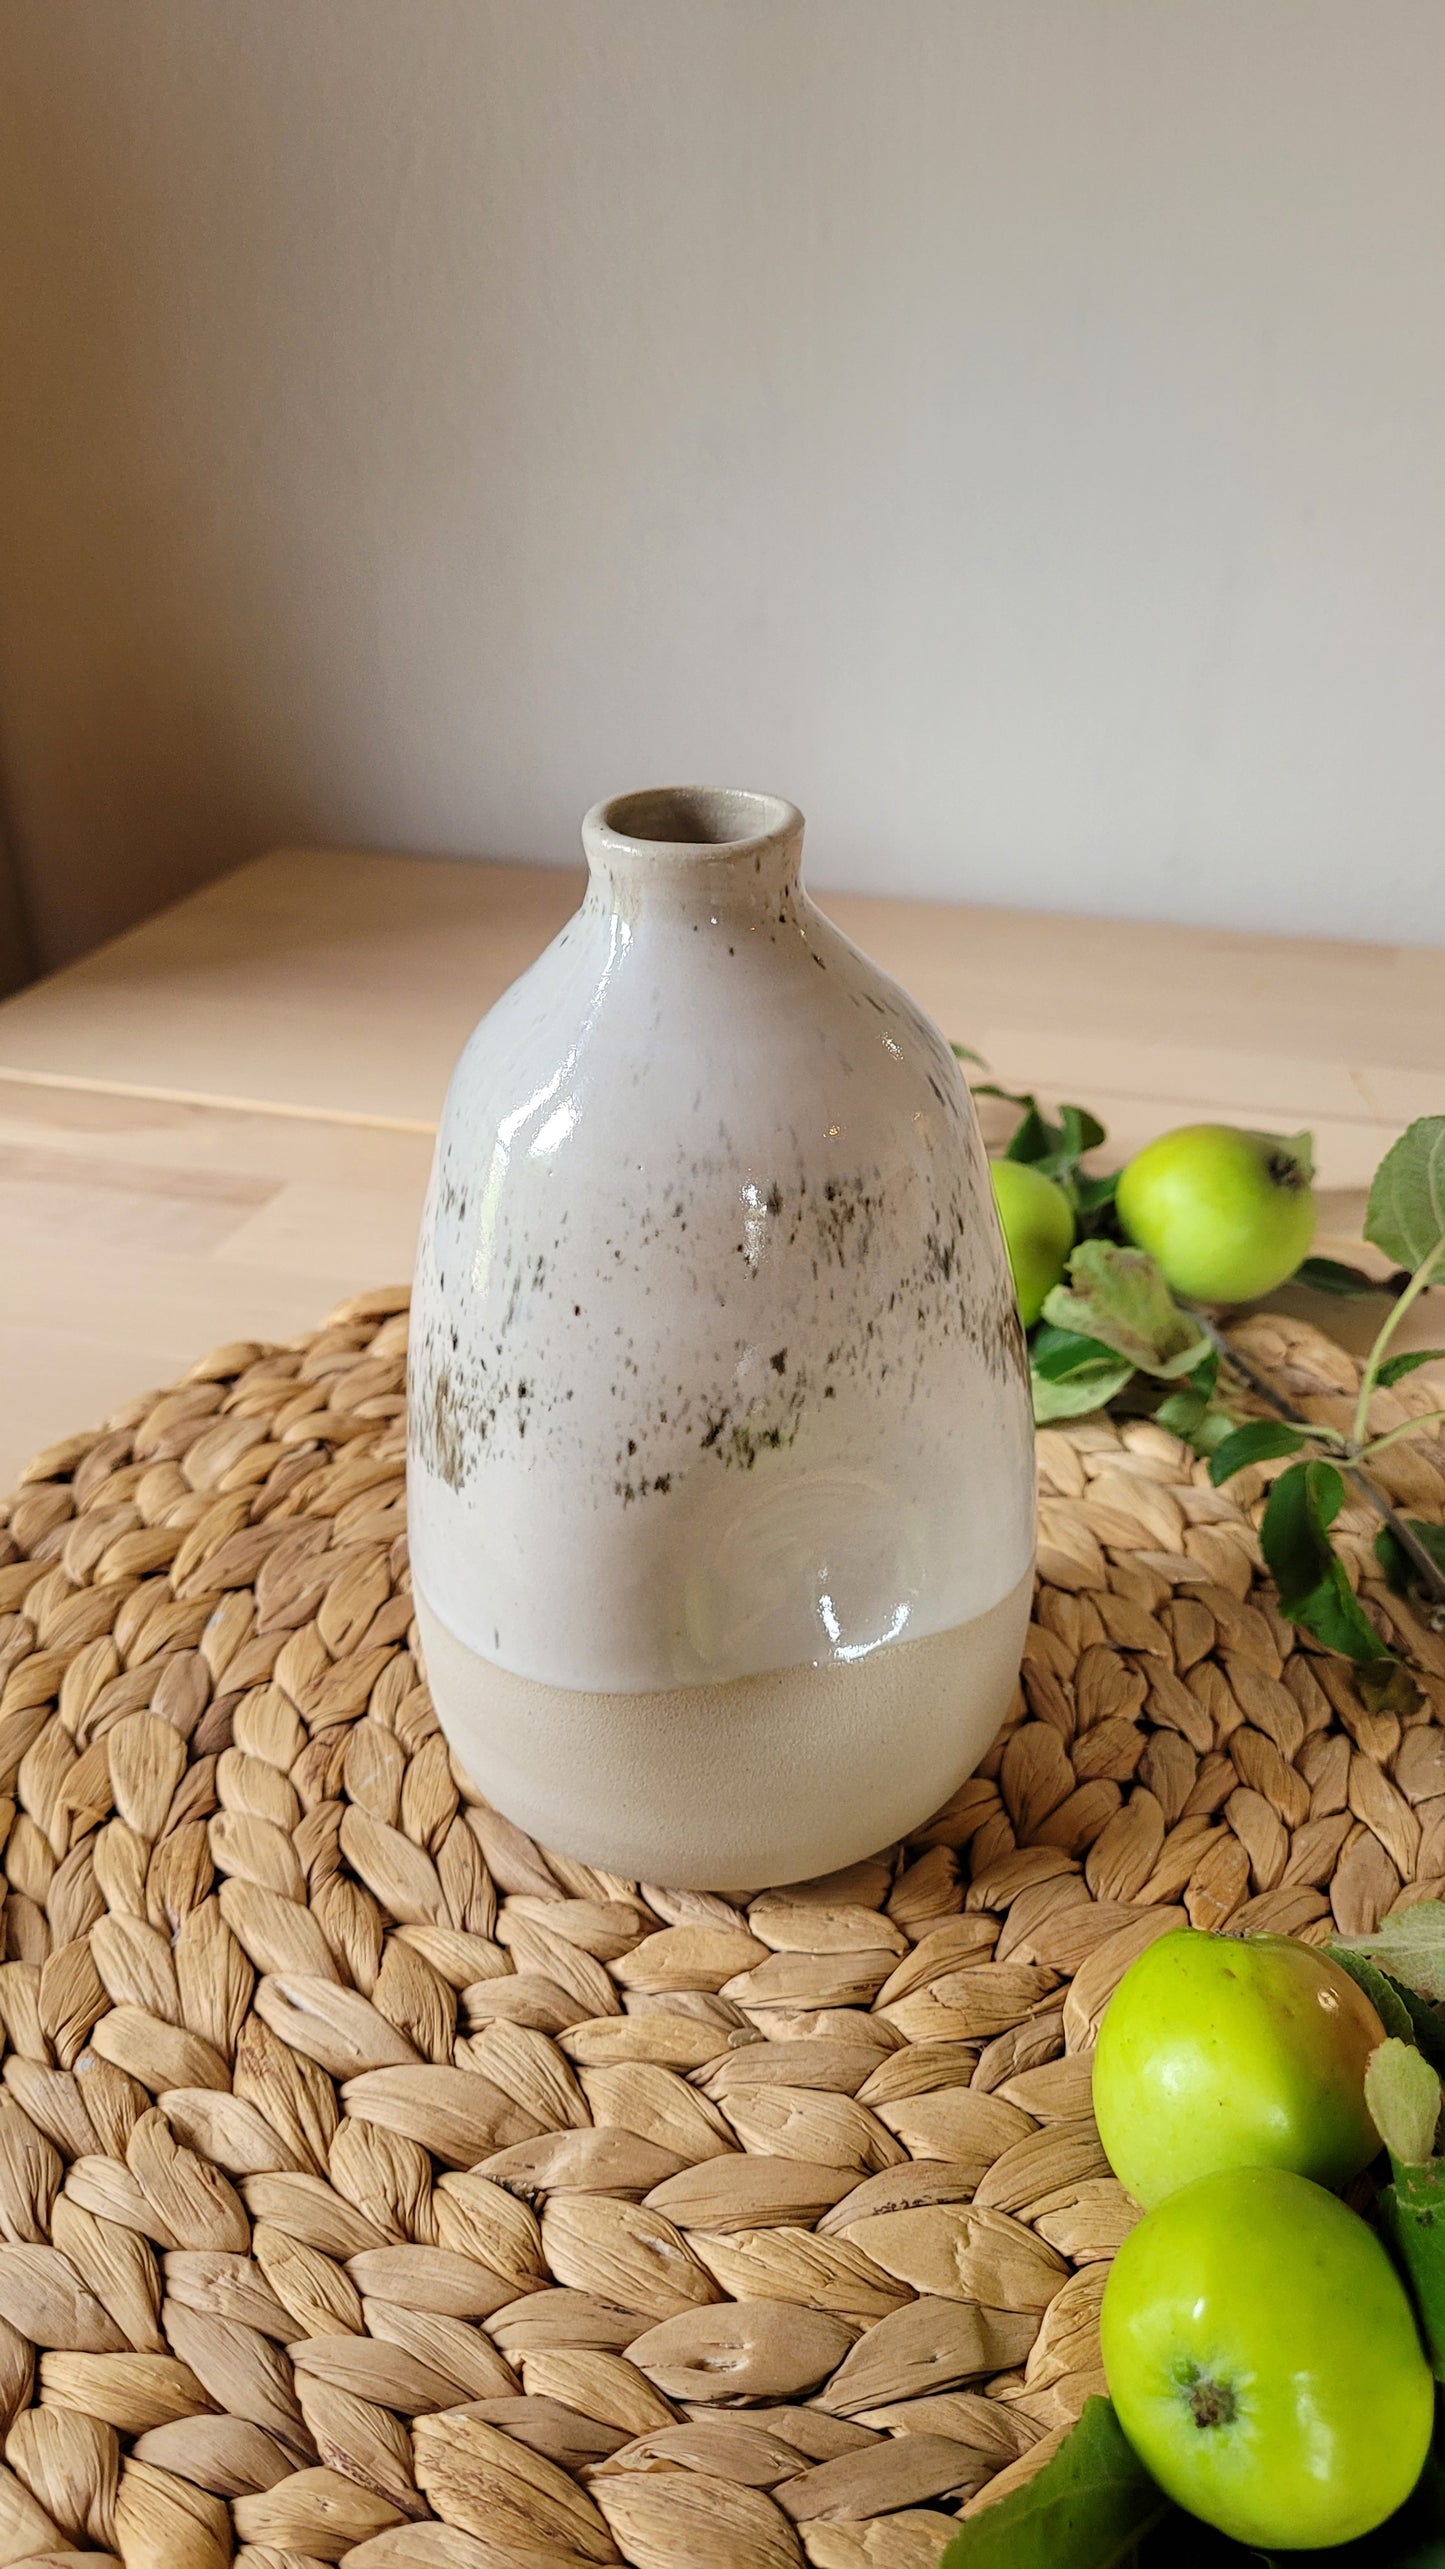 Cream White Pottery Vase - Handcrafted with Unique Milk White and Black Speckled Glazing